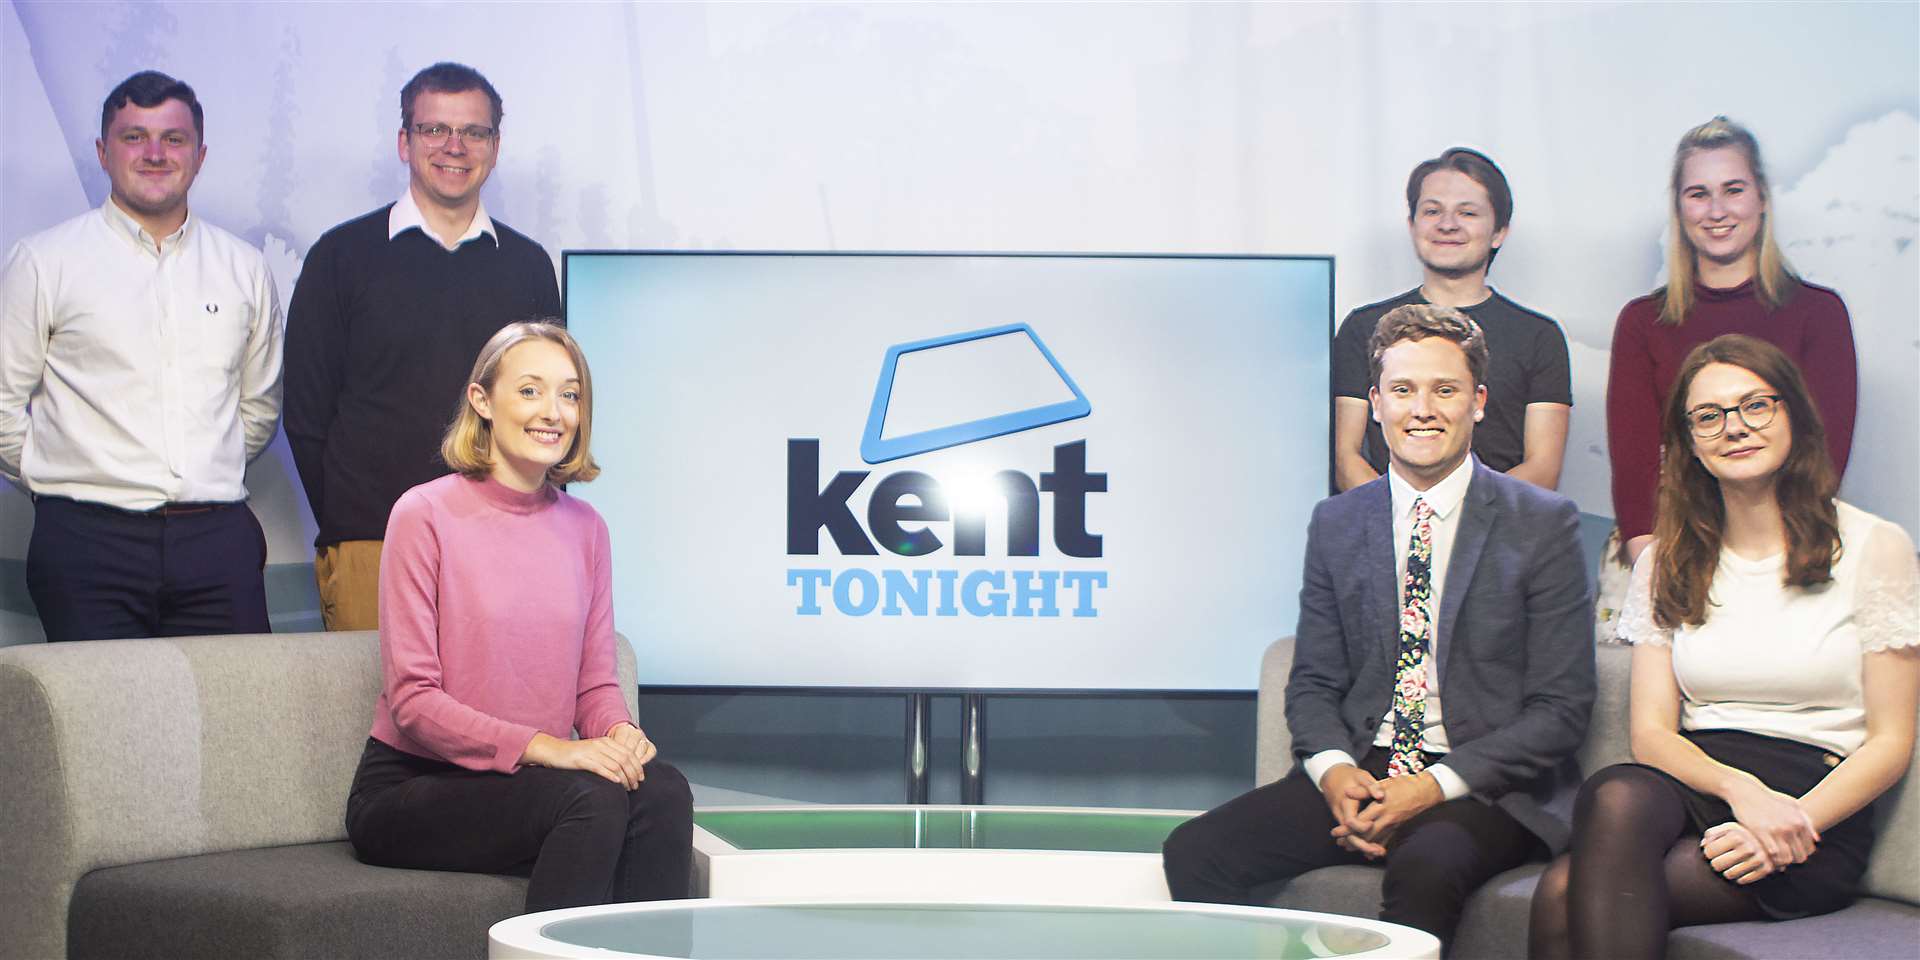 KMTV provides quality news, sport and entertainment 24/7 across Maidstone, Medway, Tunbridge Wells, Tonbridge and the surrounding areas on Freeview channel 7 and Virgin Media channel 159.